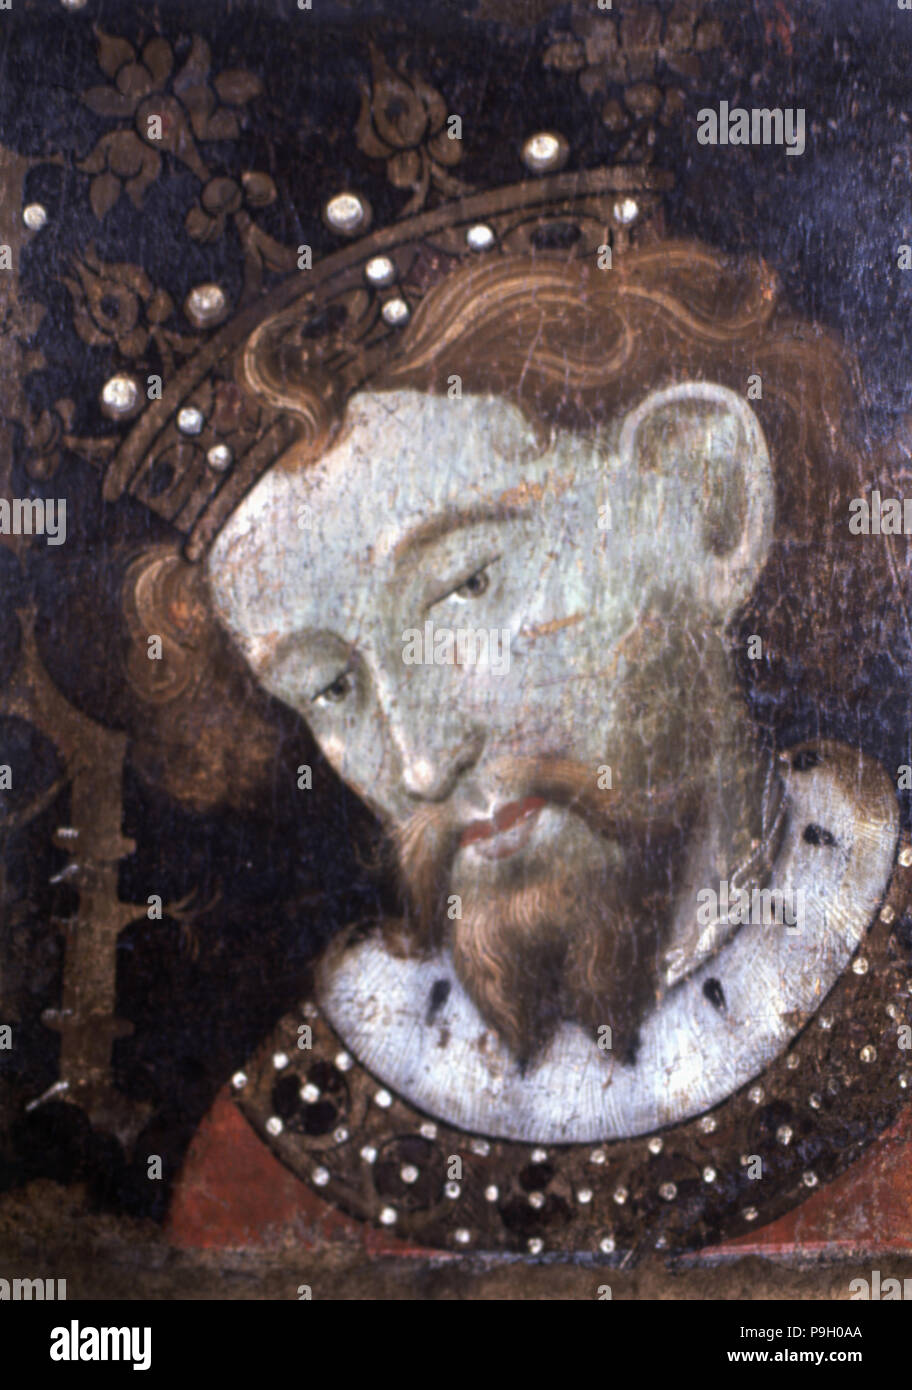 Jaime I 'The Conqueror' '(1208-1276), King of Aragon from 1213, panel Painting. Stock Photo